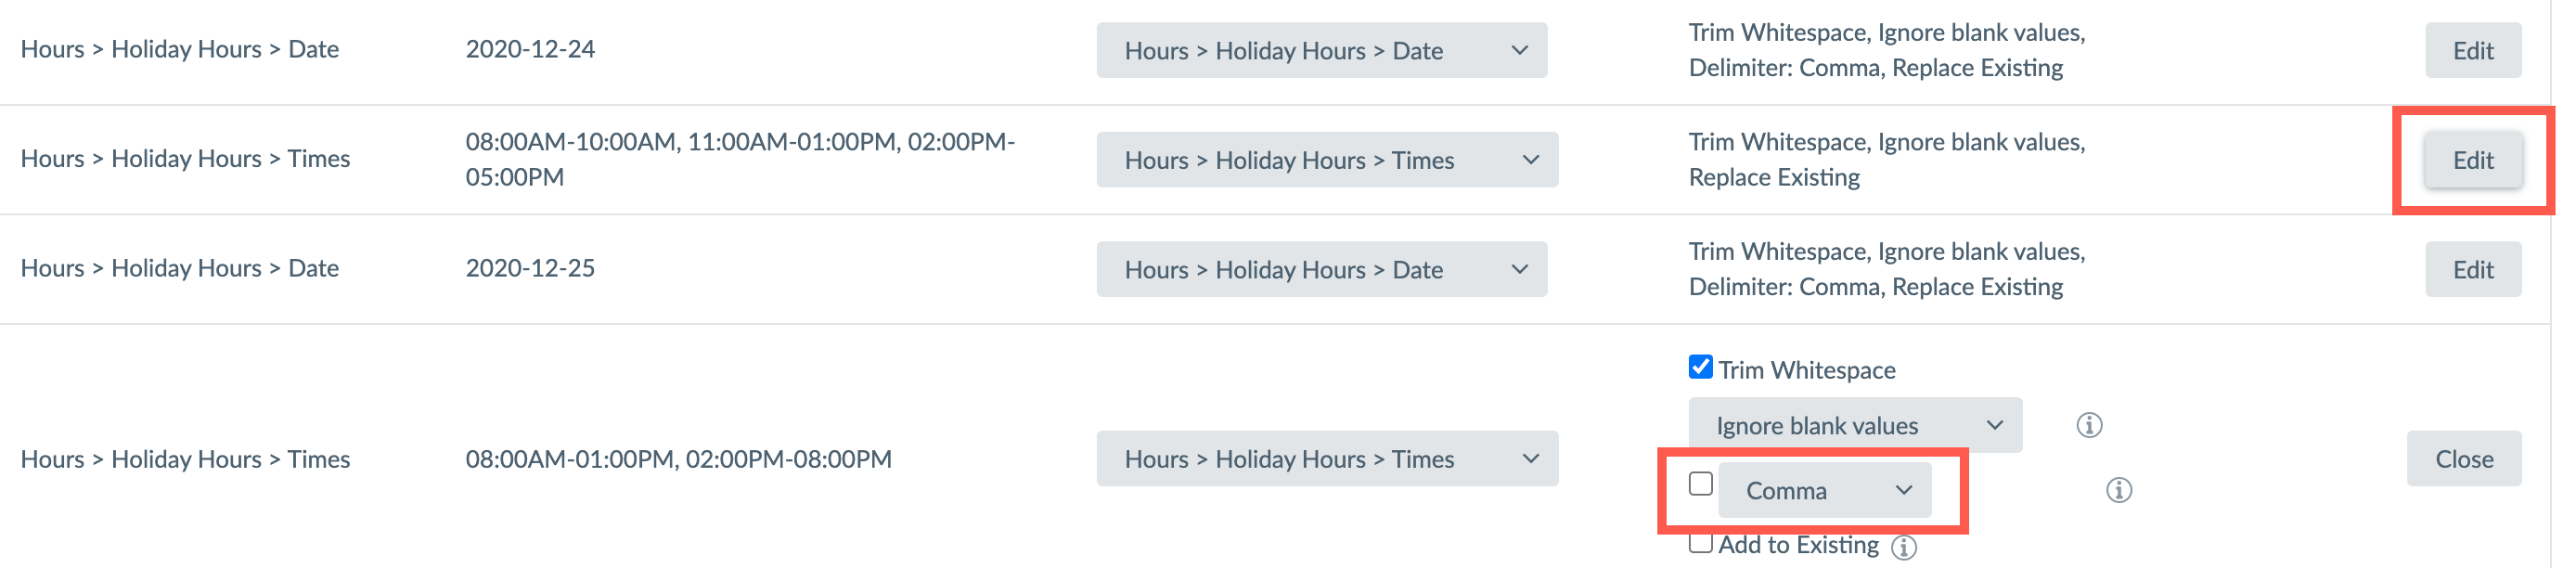 Add_holiday_hours_through_spreadsheet_upload_screenshot.png